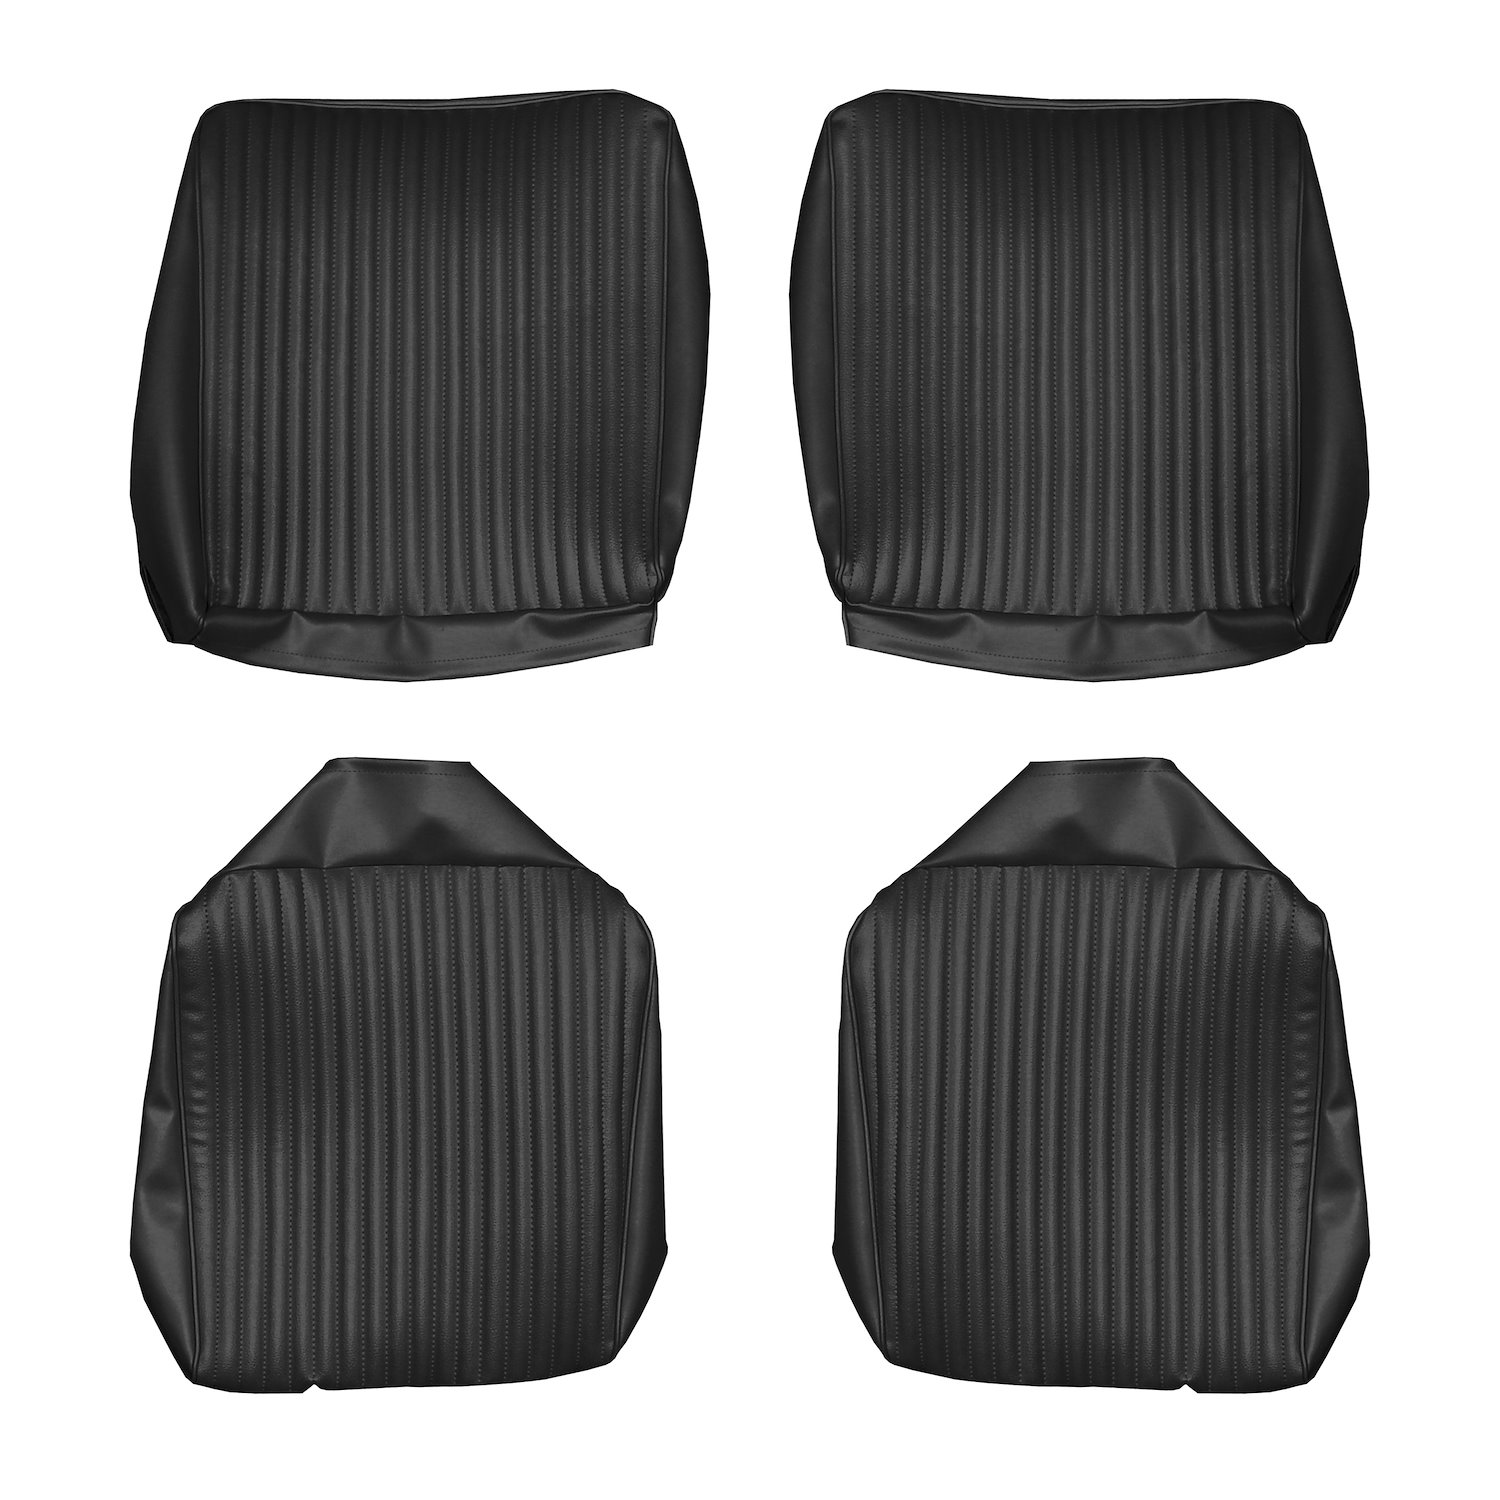 AA67CX00070100 67 CHARGER FASTBACK REAR BUCKETS - BLACK